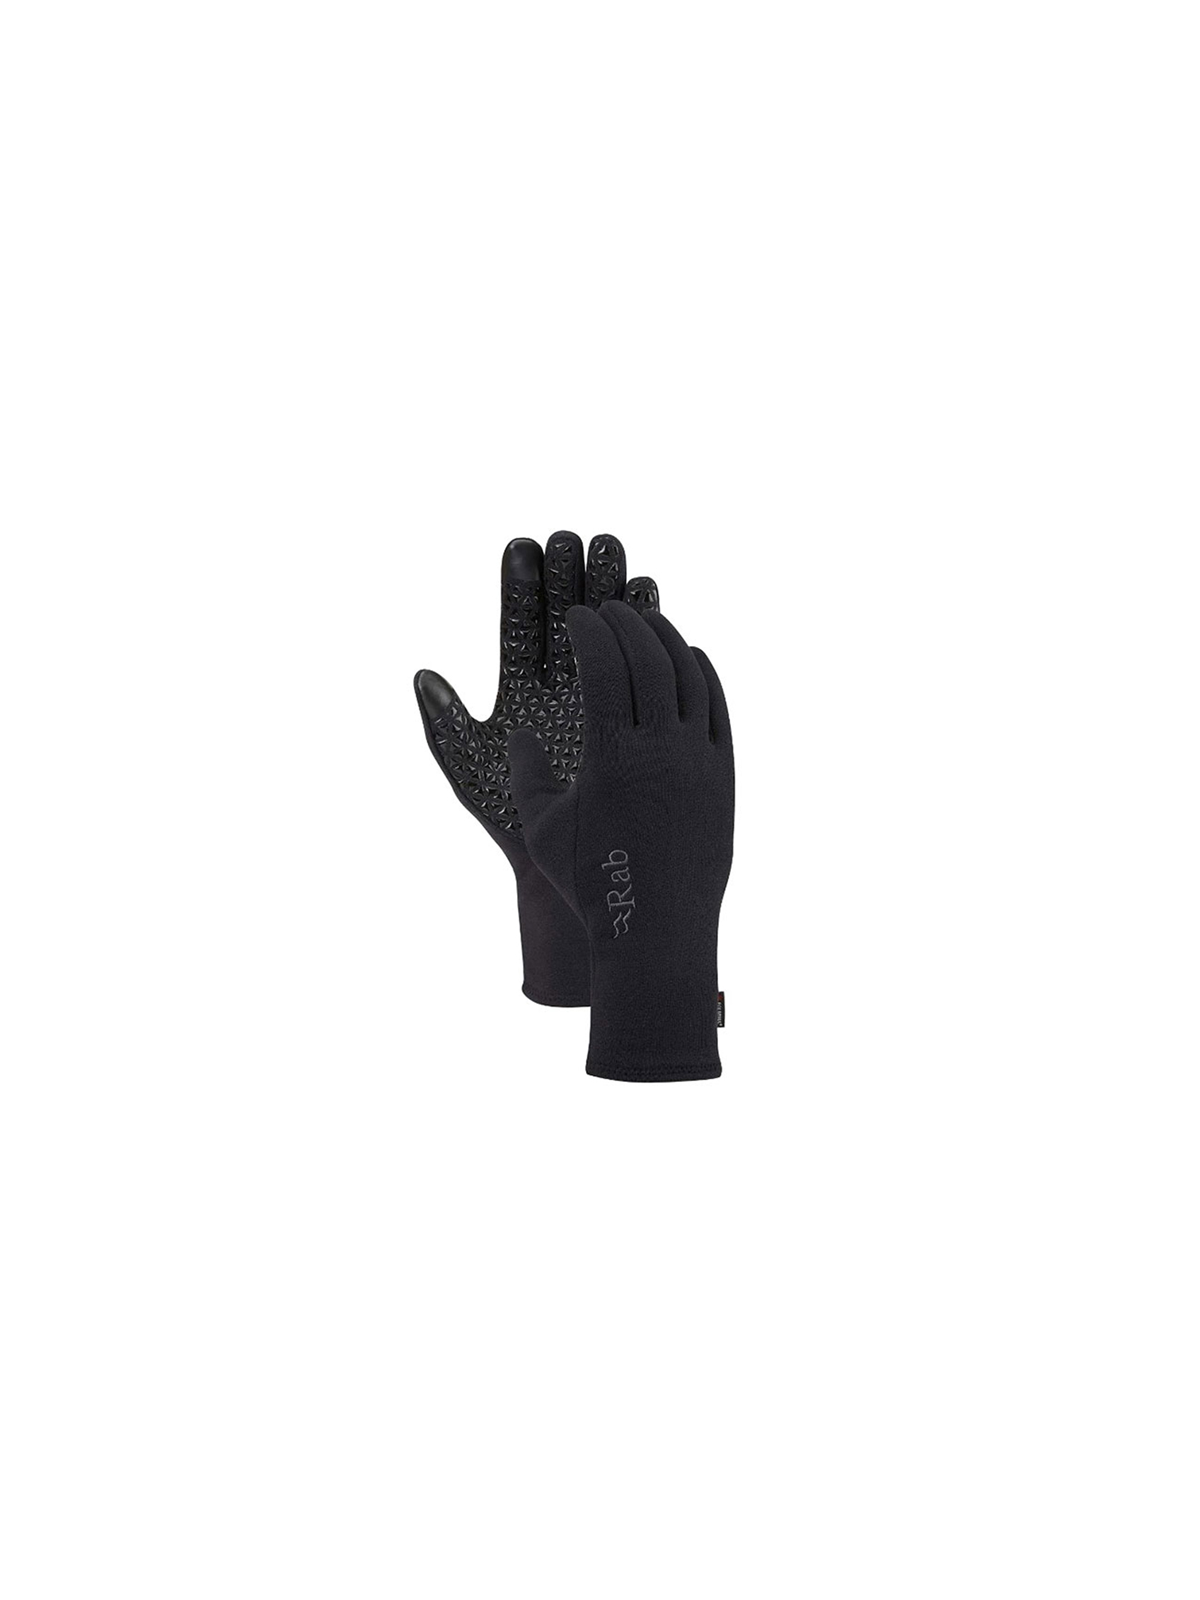 Rab Power Stretch Contact Grip Glove